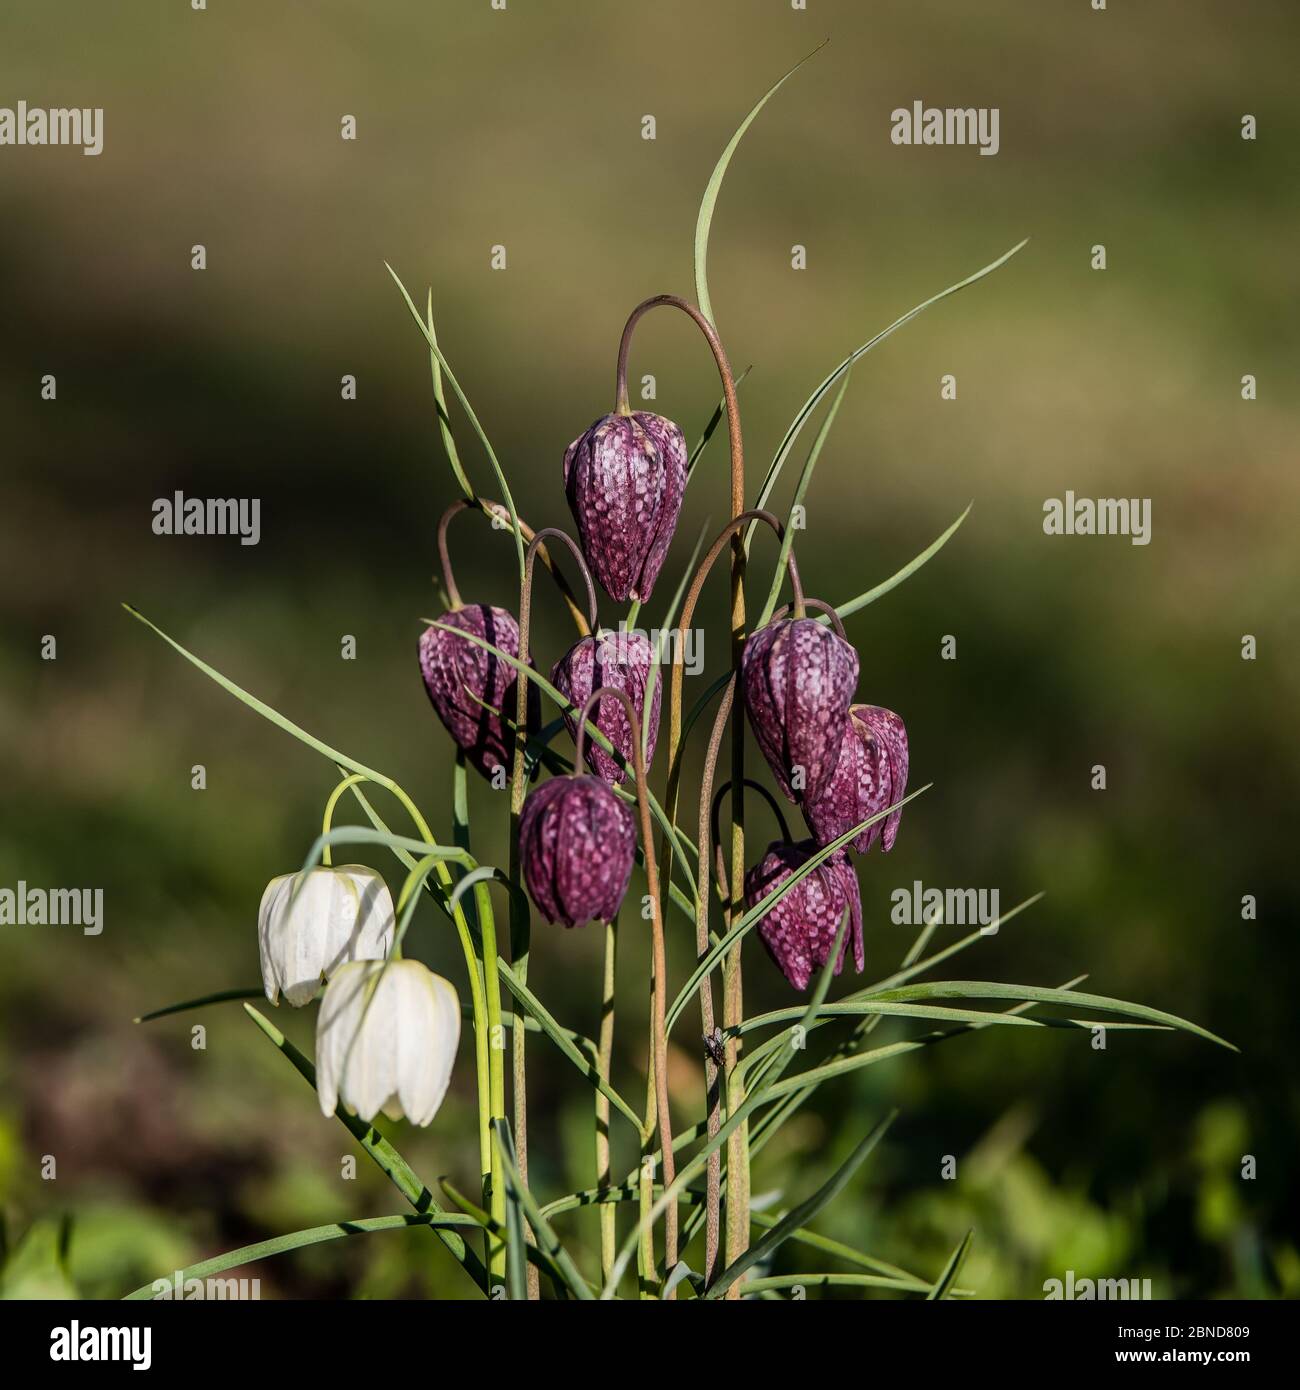 The beautiful group of Snake’s head (fritillaria meleagris) with the red chequered and white flowers with a calm green background Stock Photo